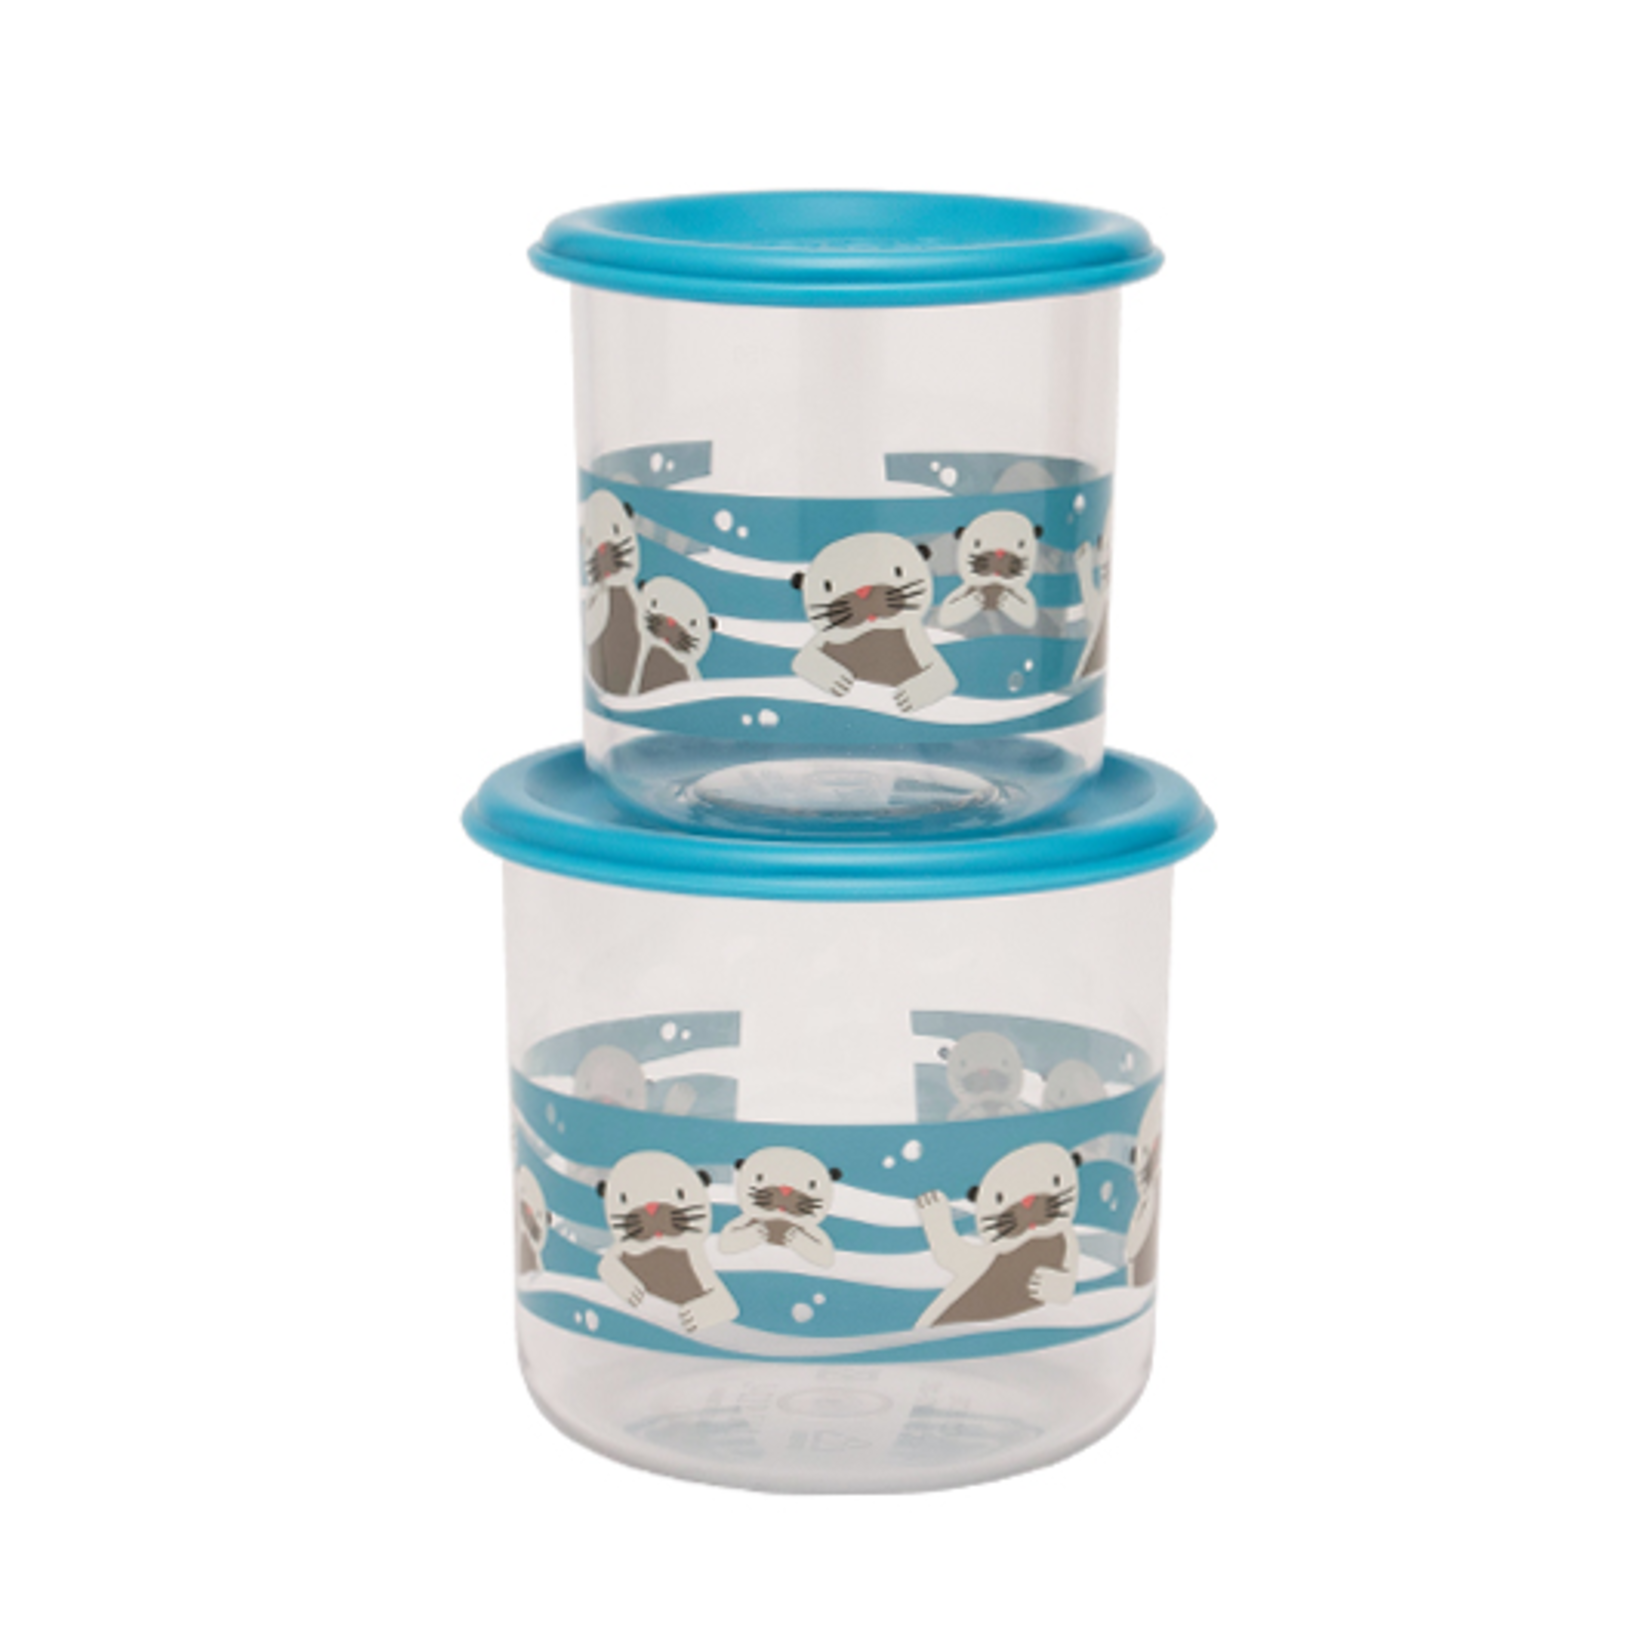 ORE Originals Snack Container S/2, Large, Baby Otter